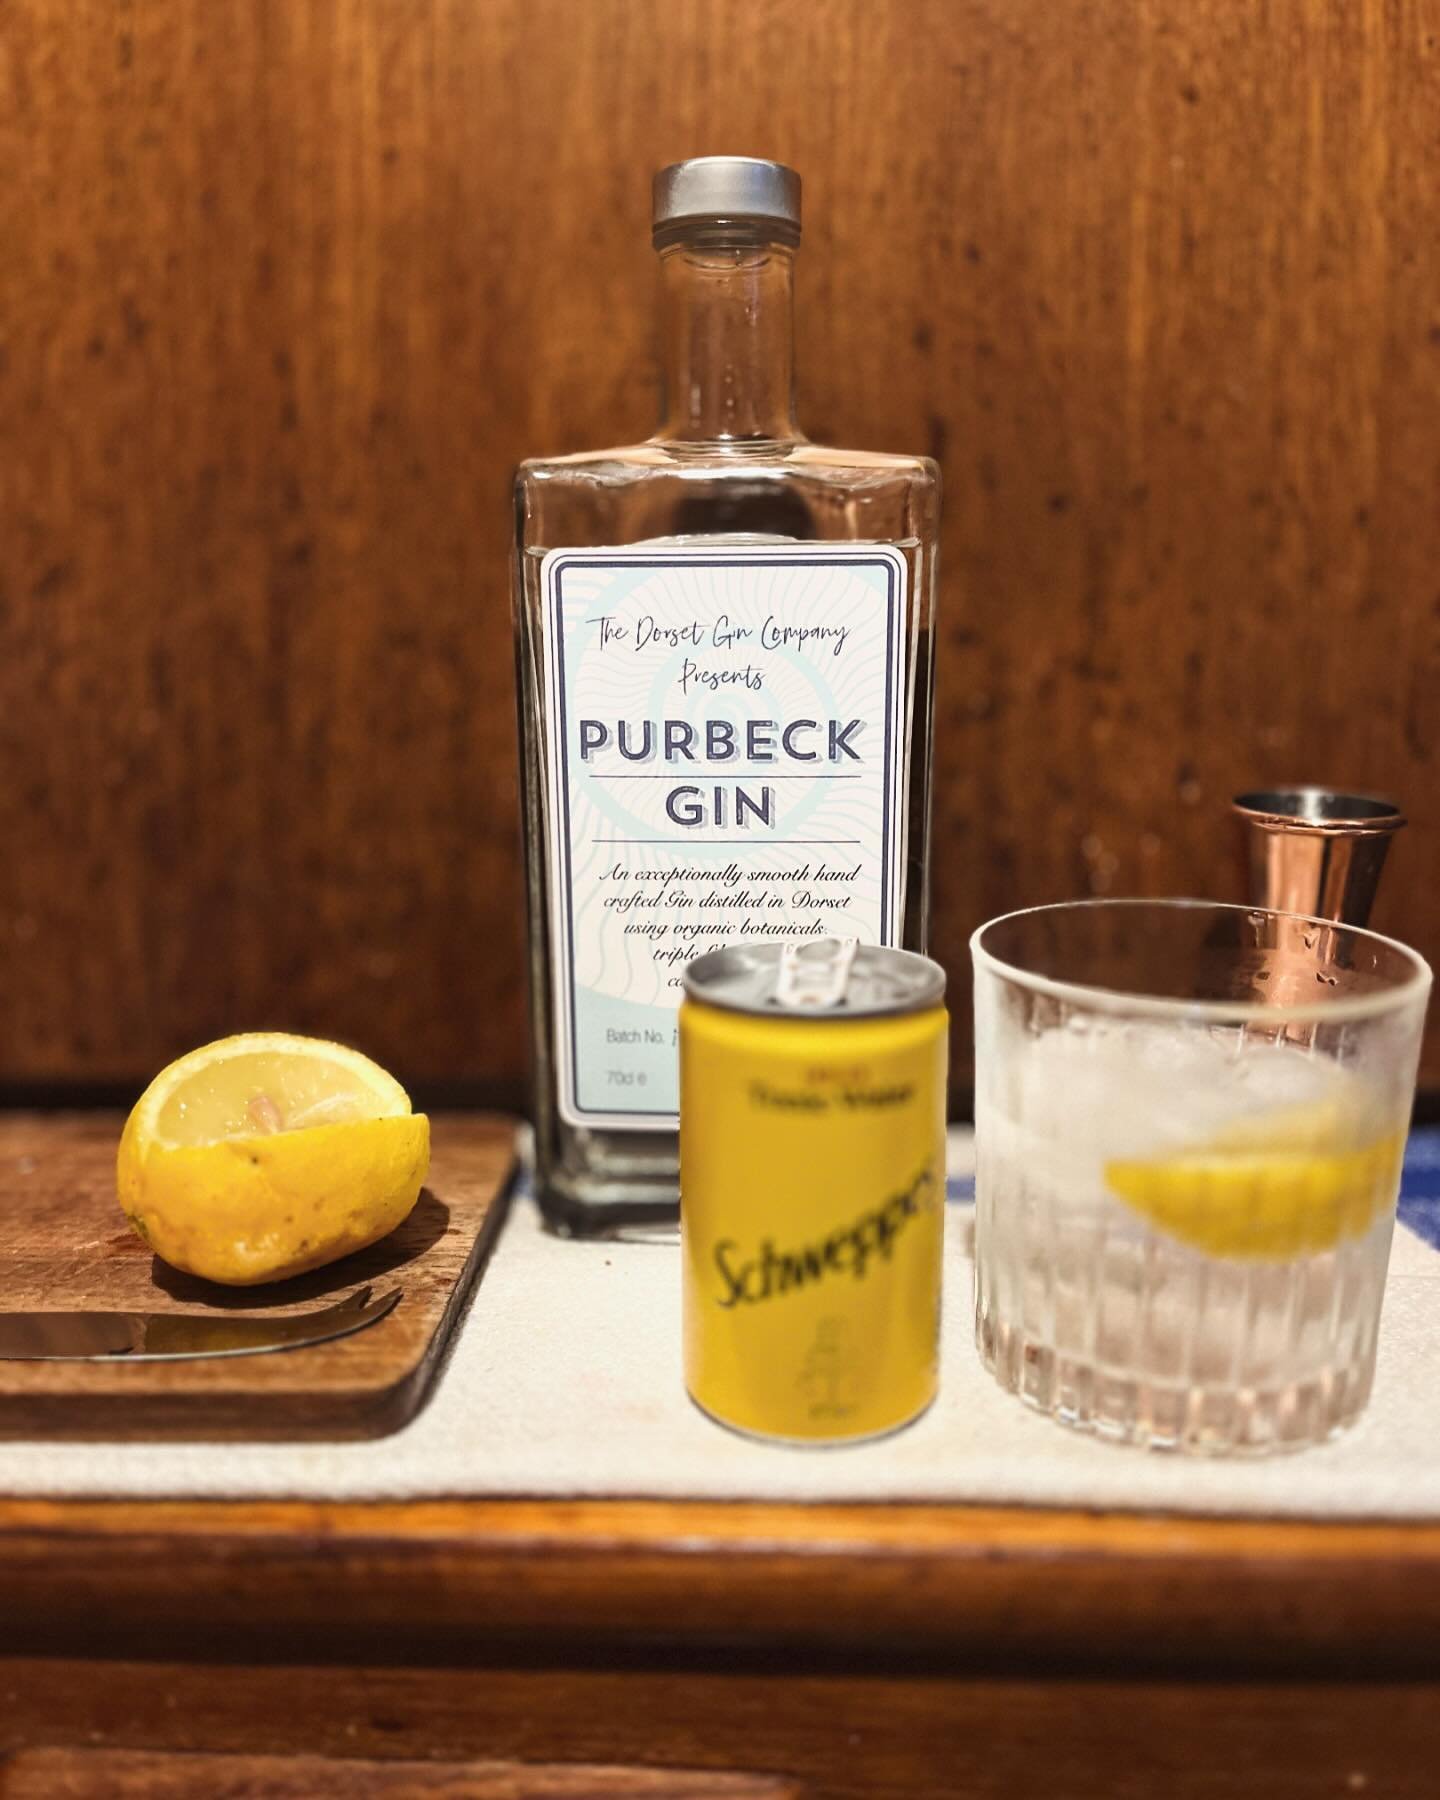 Mothers Ruin.

Saffron Darby suggests that the  @dorsetgincompany Purbeck Gin which we were very kindly given yesterday by a Gentleman with impeccable taste and of course style, is not to be taken lying down. Au contraire.. 

Last night a G&amp;T, to